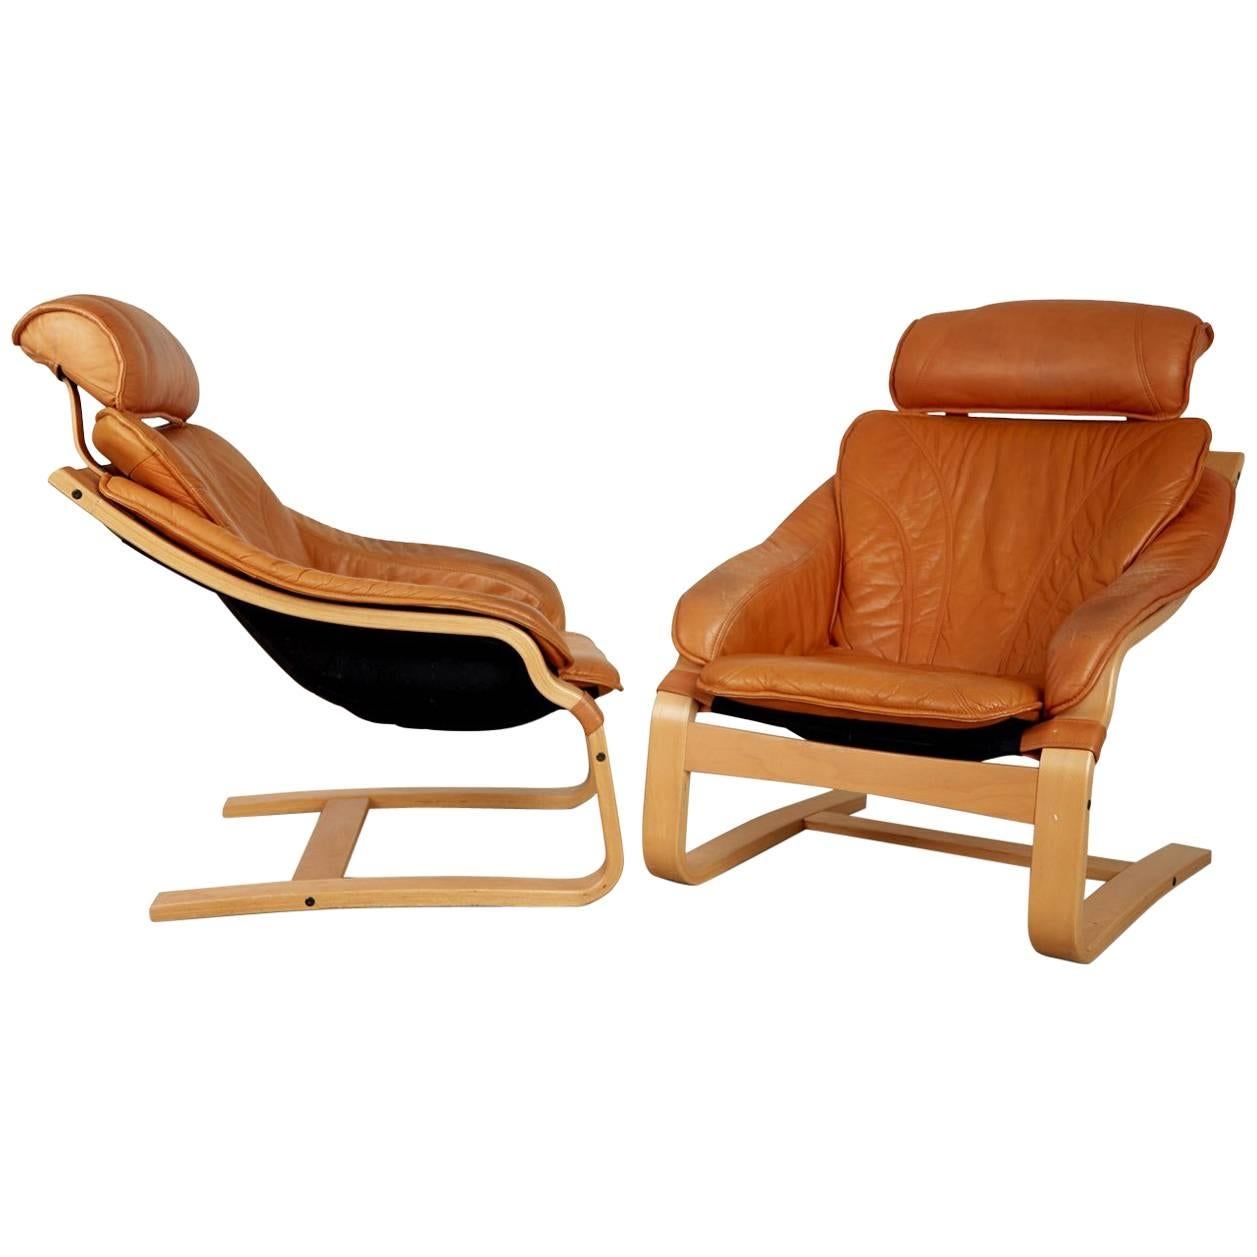 With sleek lines and a sculptural design, these cantilevered lounge chairs walk the line between Danish Modern and Postmodern style. Created in the similar style of the Siesta chair by Ingmar Relling for Westnofa.

Comprised of a bent beechwood